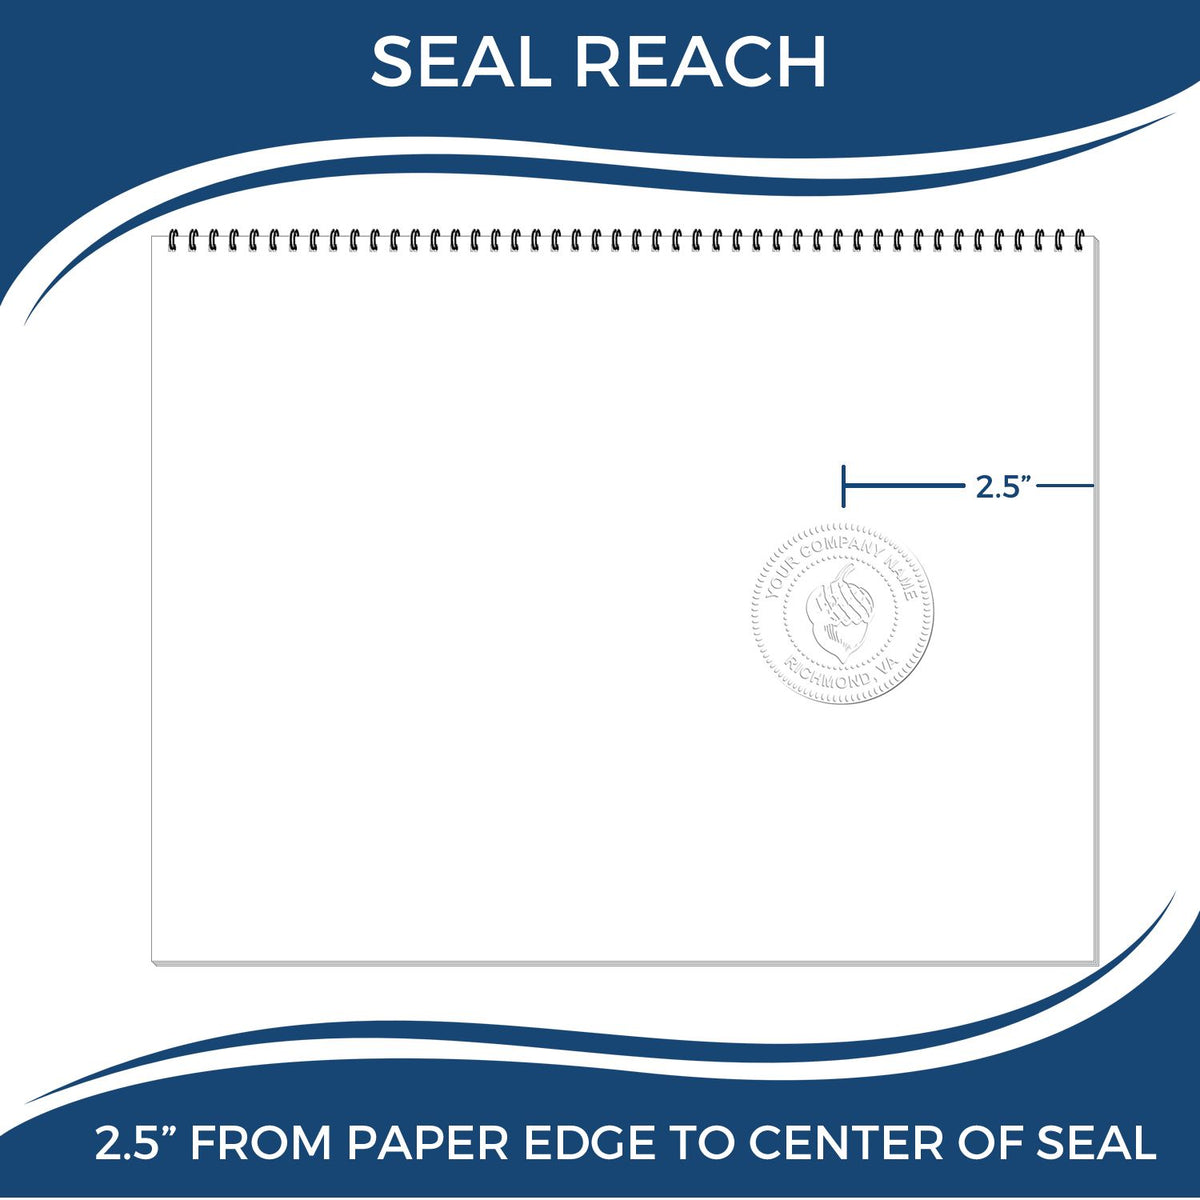 An infographic showing the seal reach which is represented by a ruler and a miniature seal image of the Heavy Duty Cast Iron Kentucky Engineer Seal Embosser